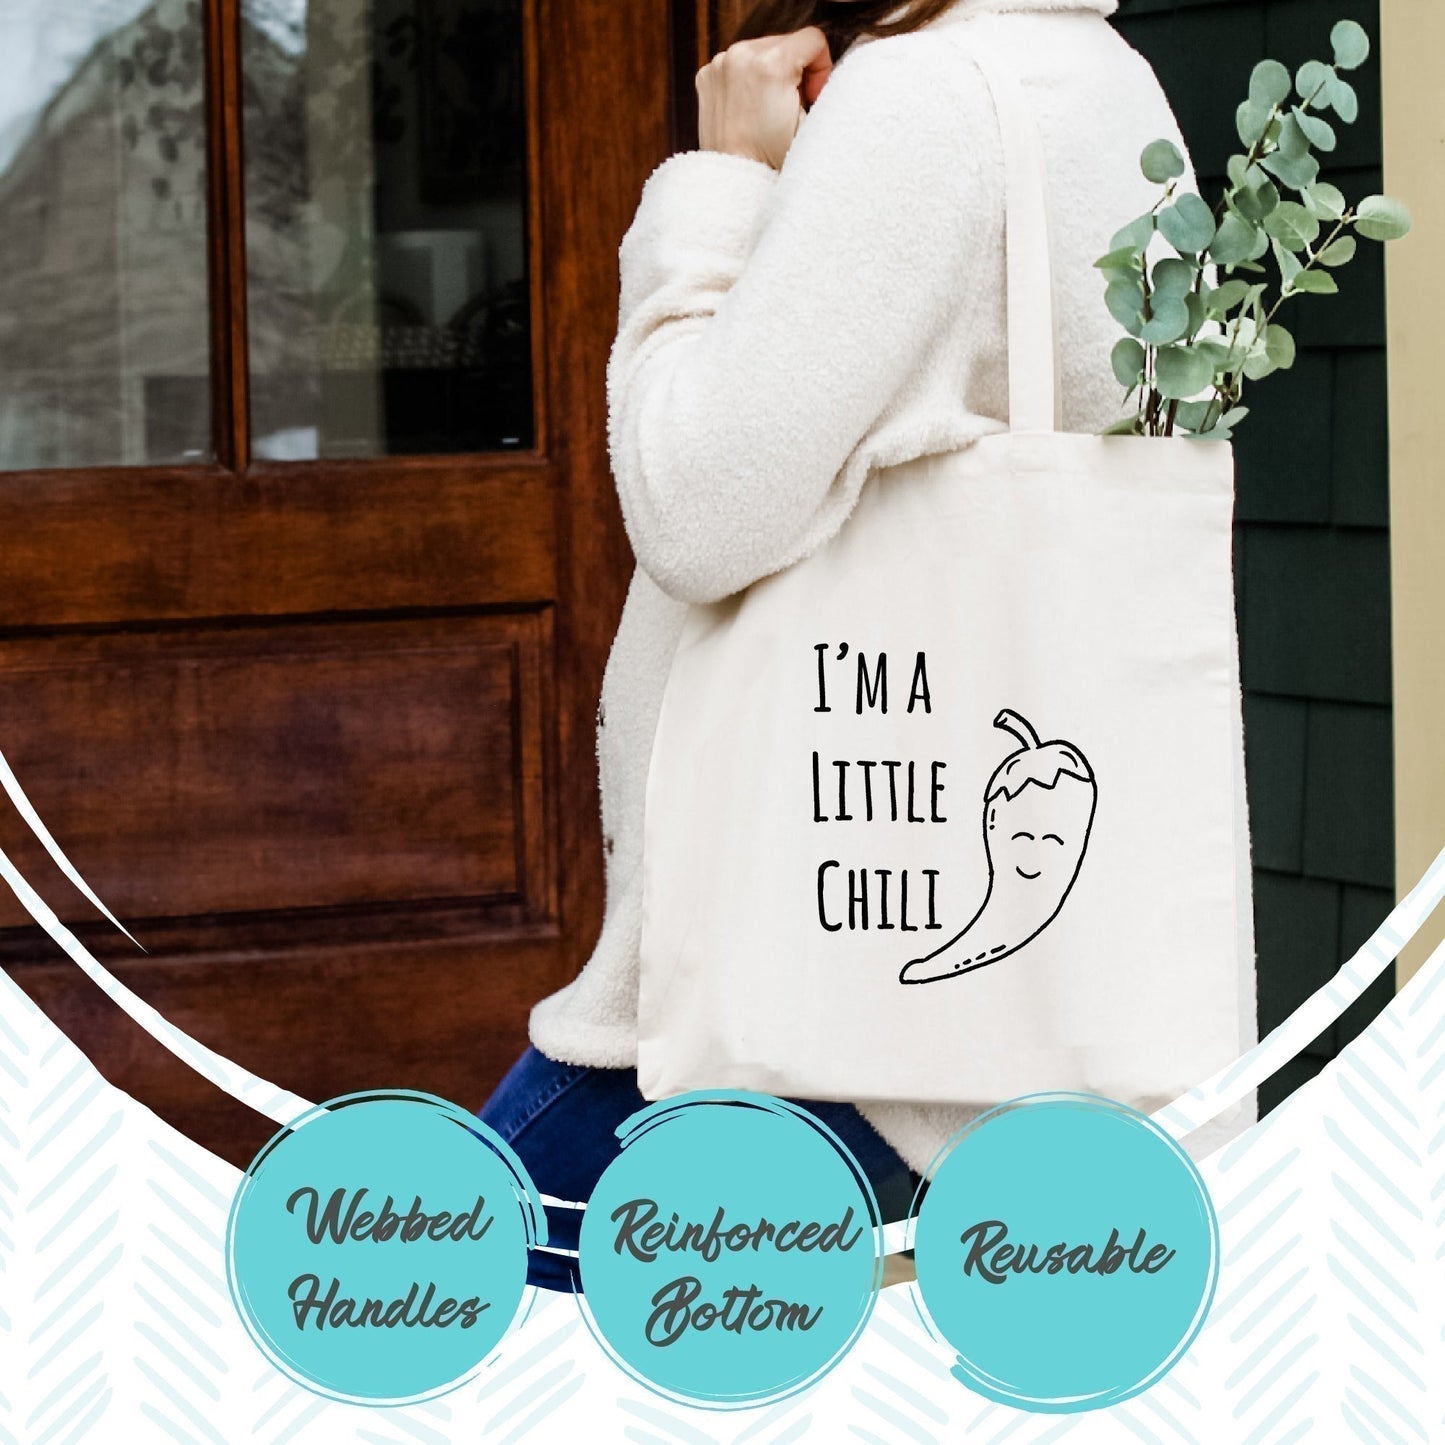 Whip It, Whip It Good - Tote Bag - MoonlightMakers